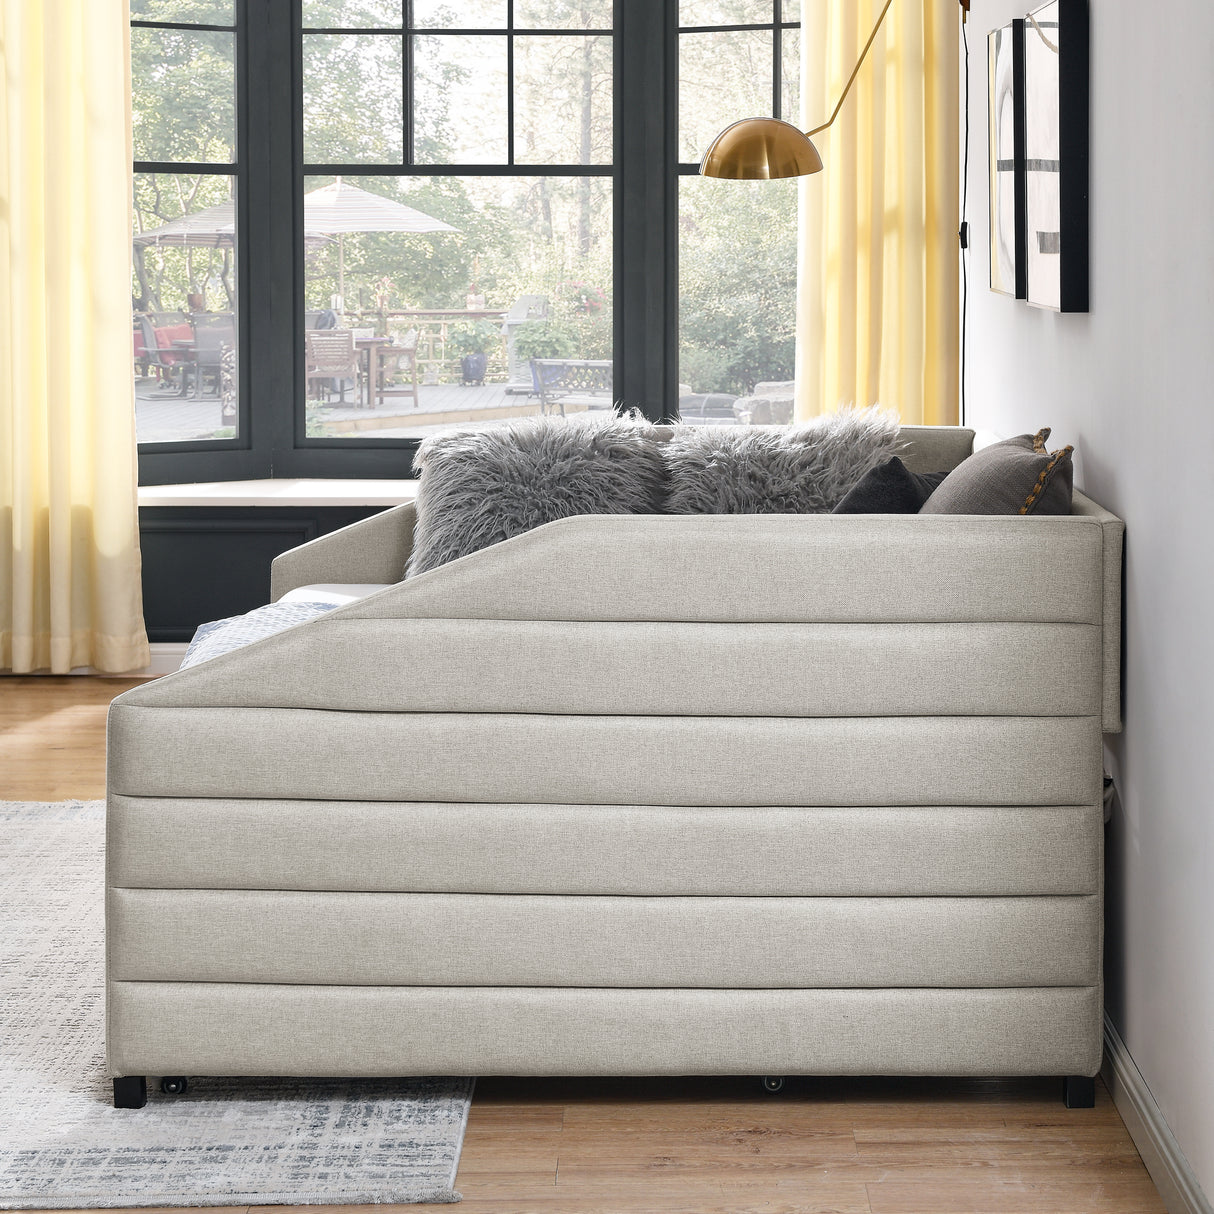 Full Size Daybed with Two Drawers Trundle Upholstered Tufted Sofa Bed, Linen Fabric, Beige (82.5"x58"x34")